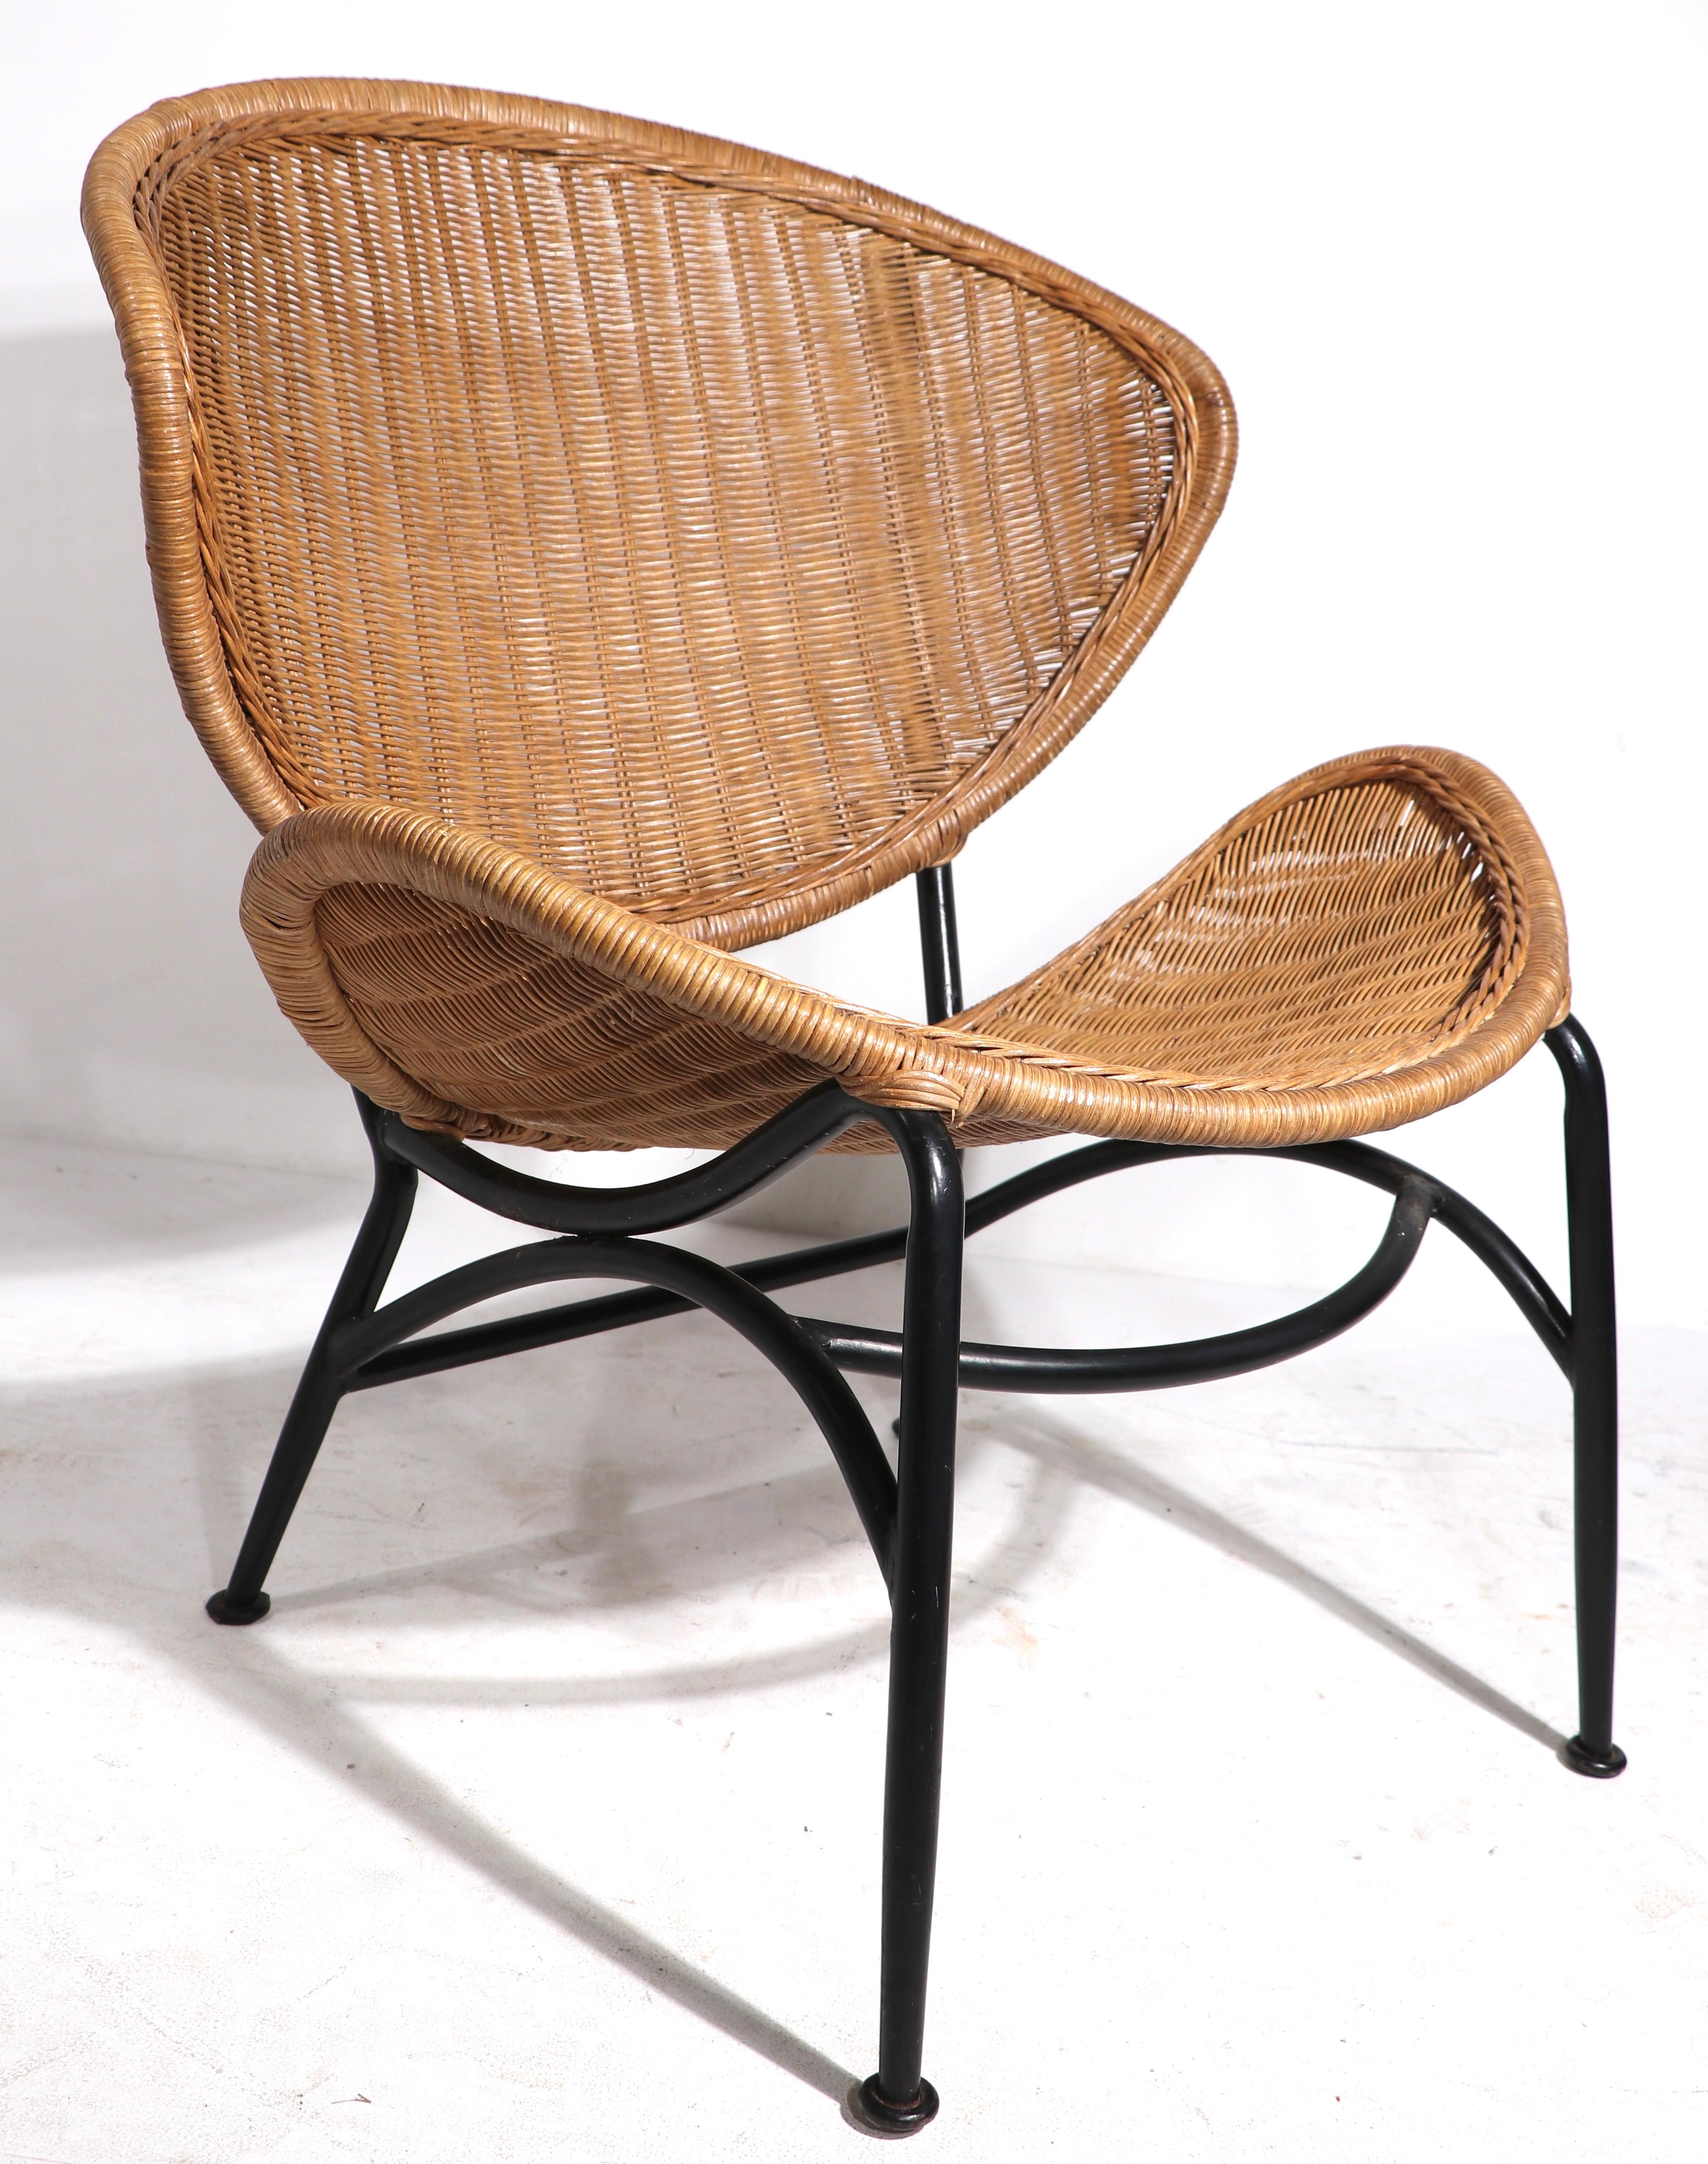 American Mid Century Wicker Lounge Chair After Umanoff